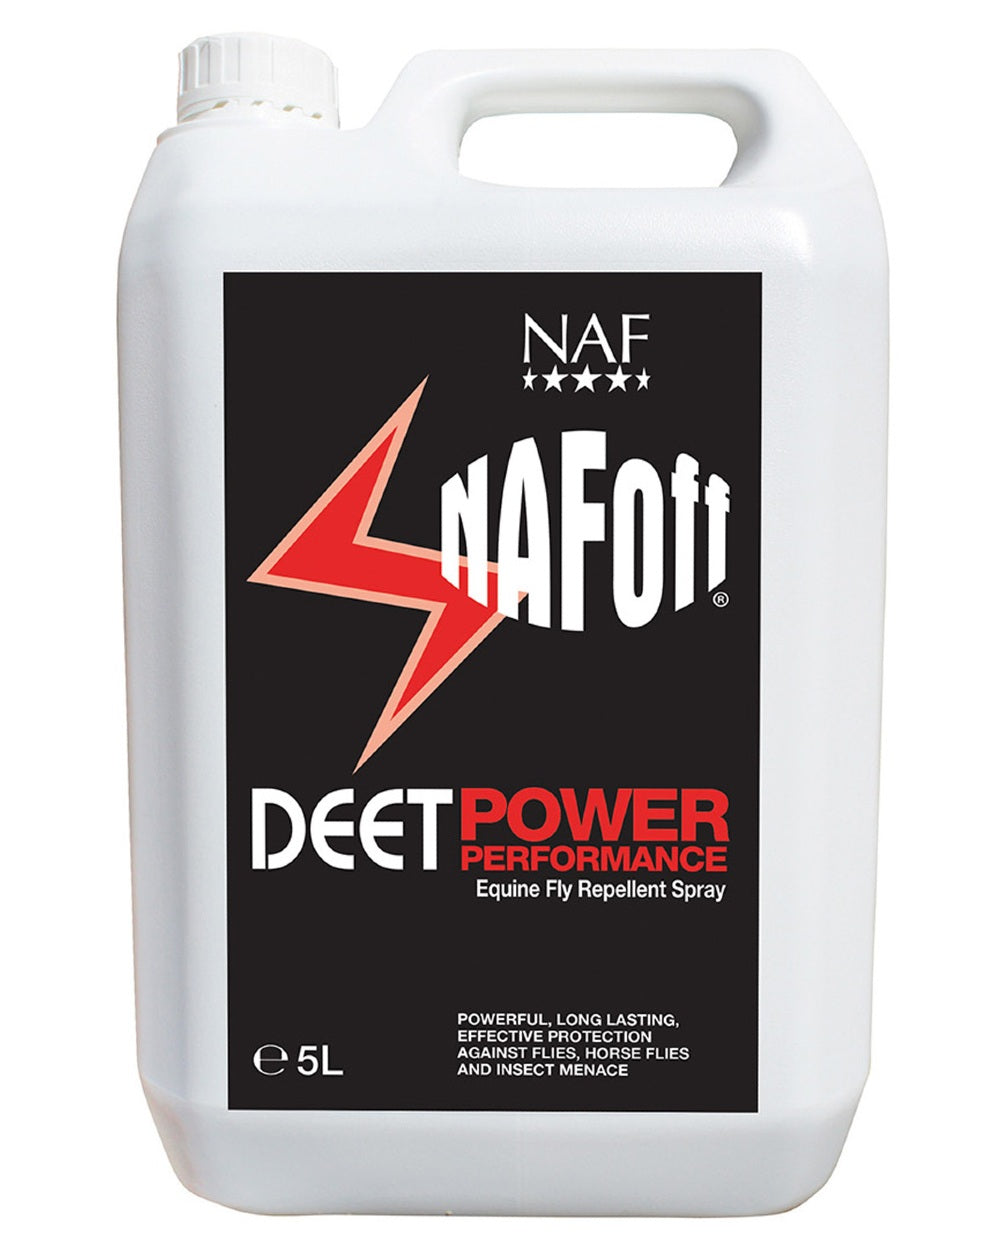 NAF Off Deet Power Performance 5l on white background